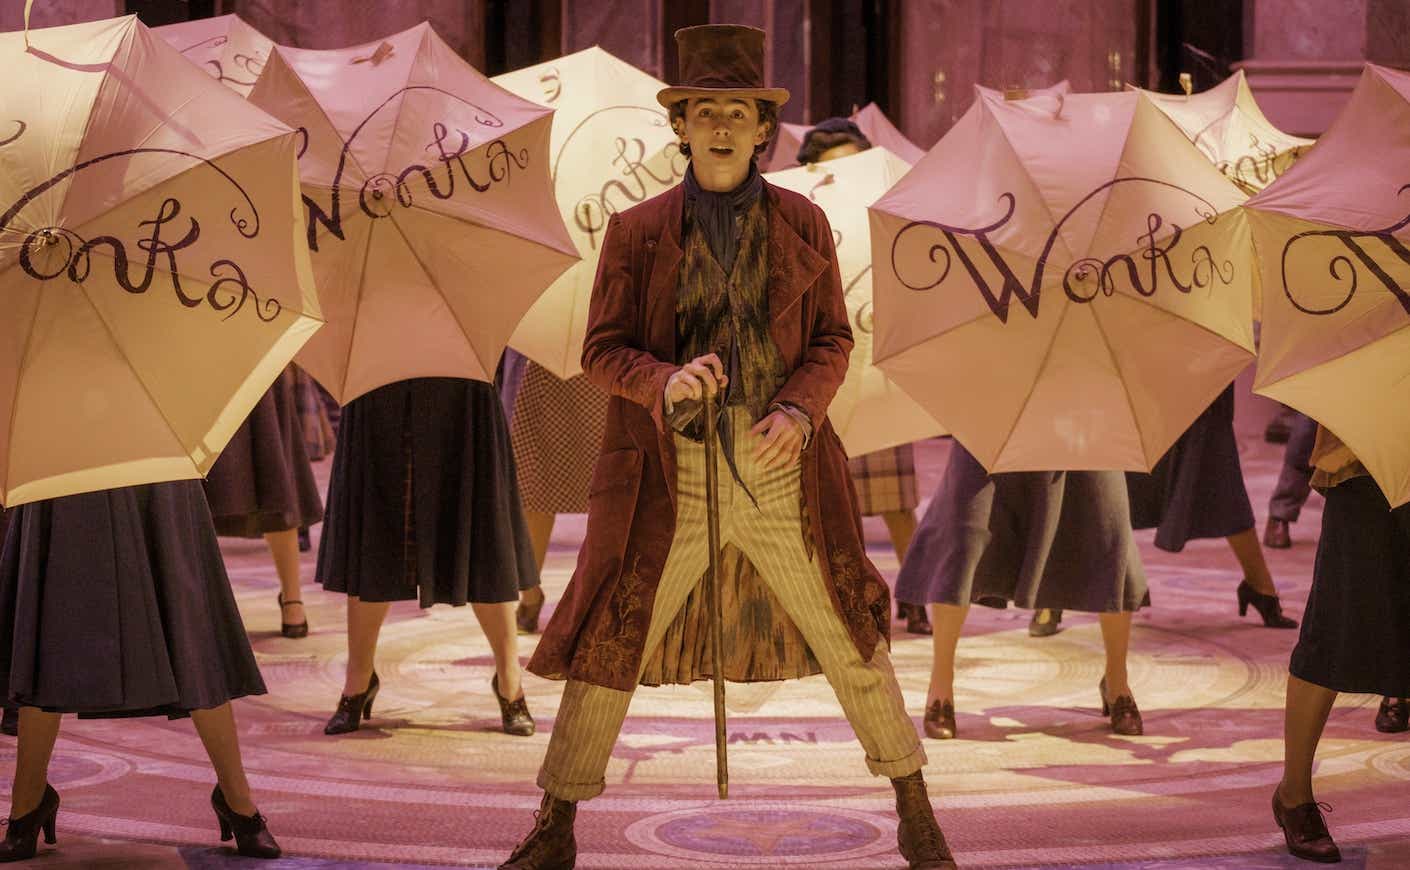 timothee chalamet on stage as willy wonka surrounded by people holding umbrellas that say "wonka"